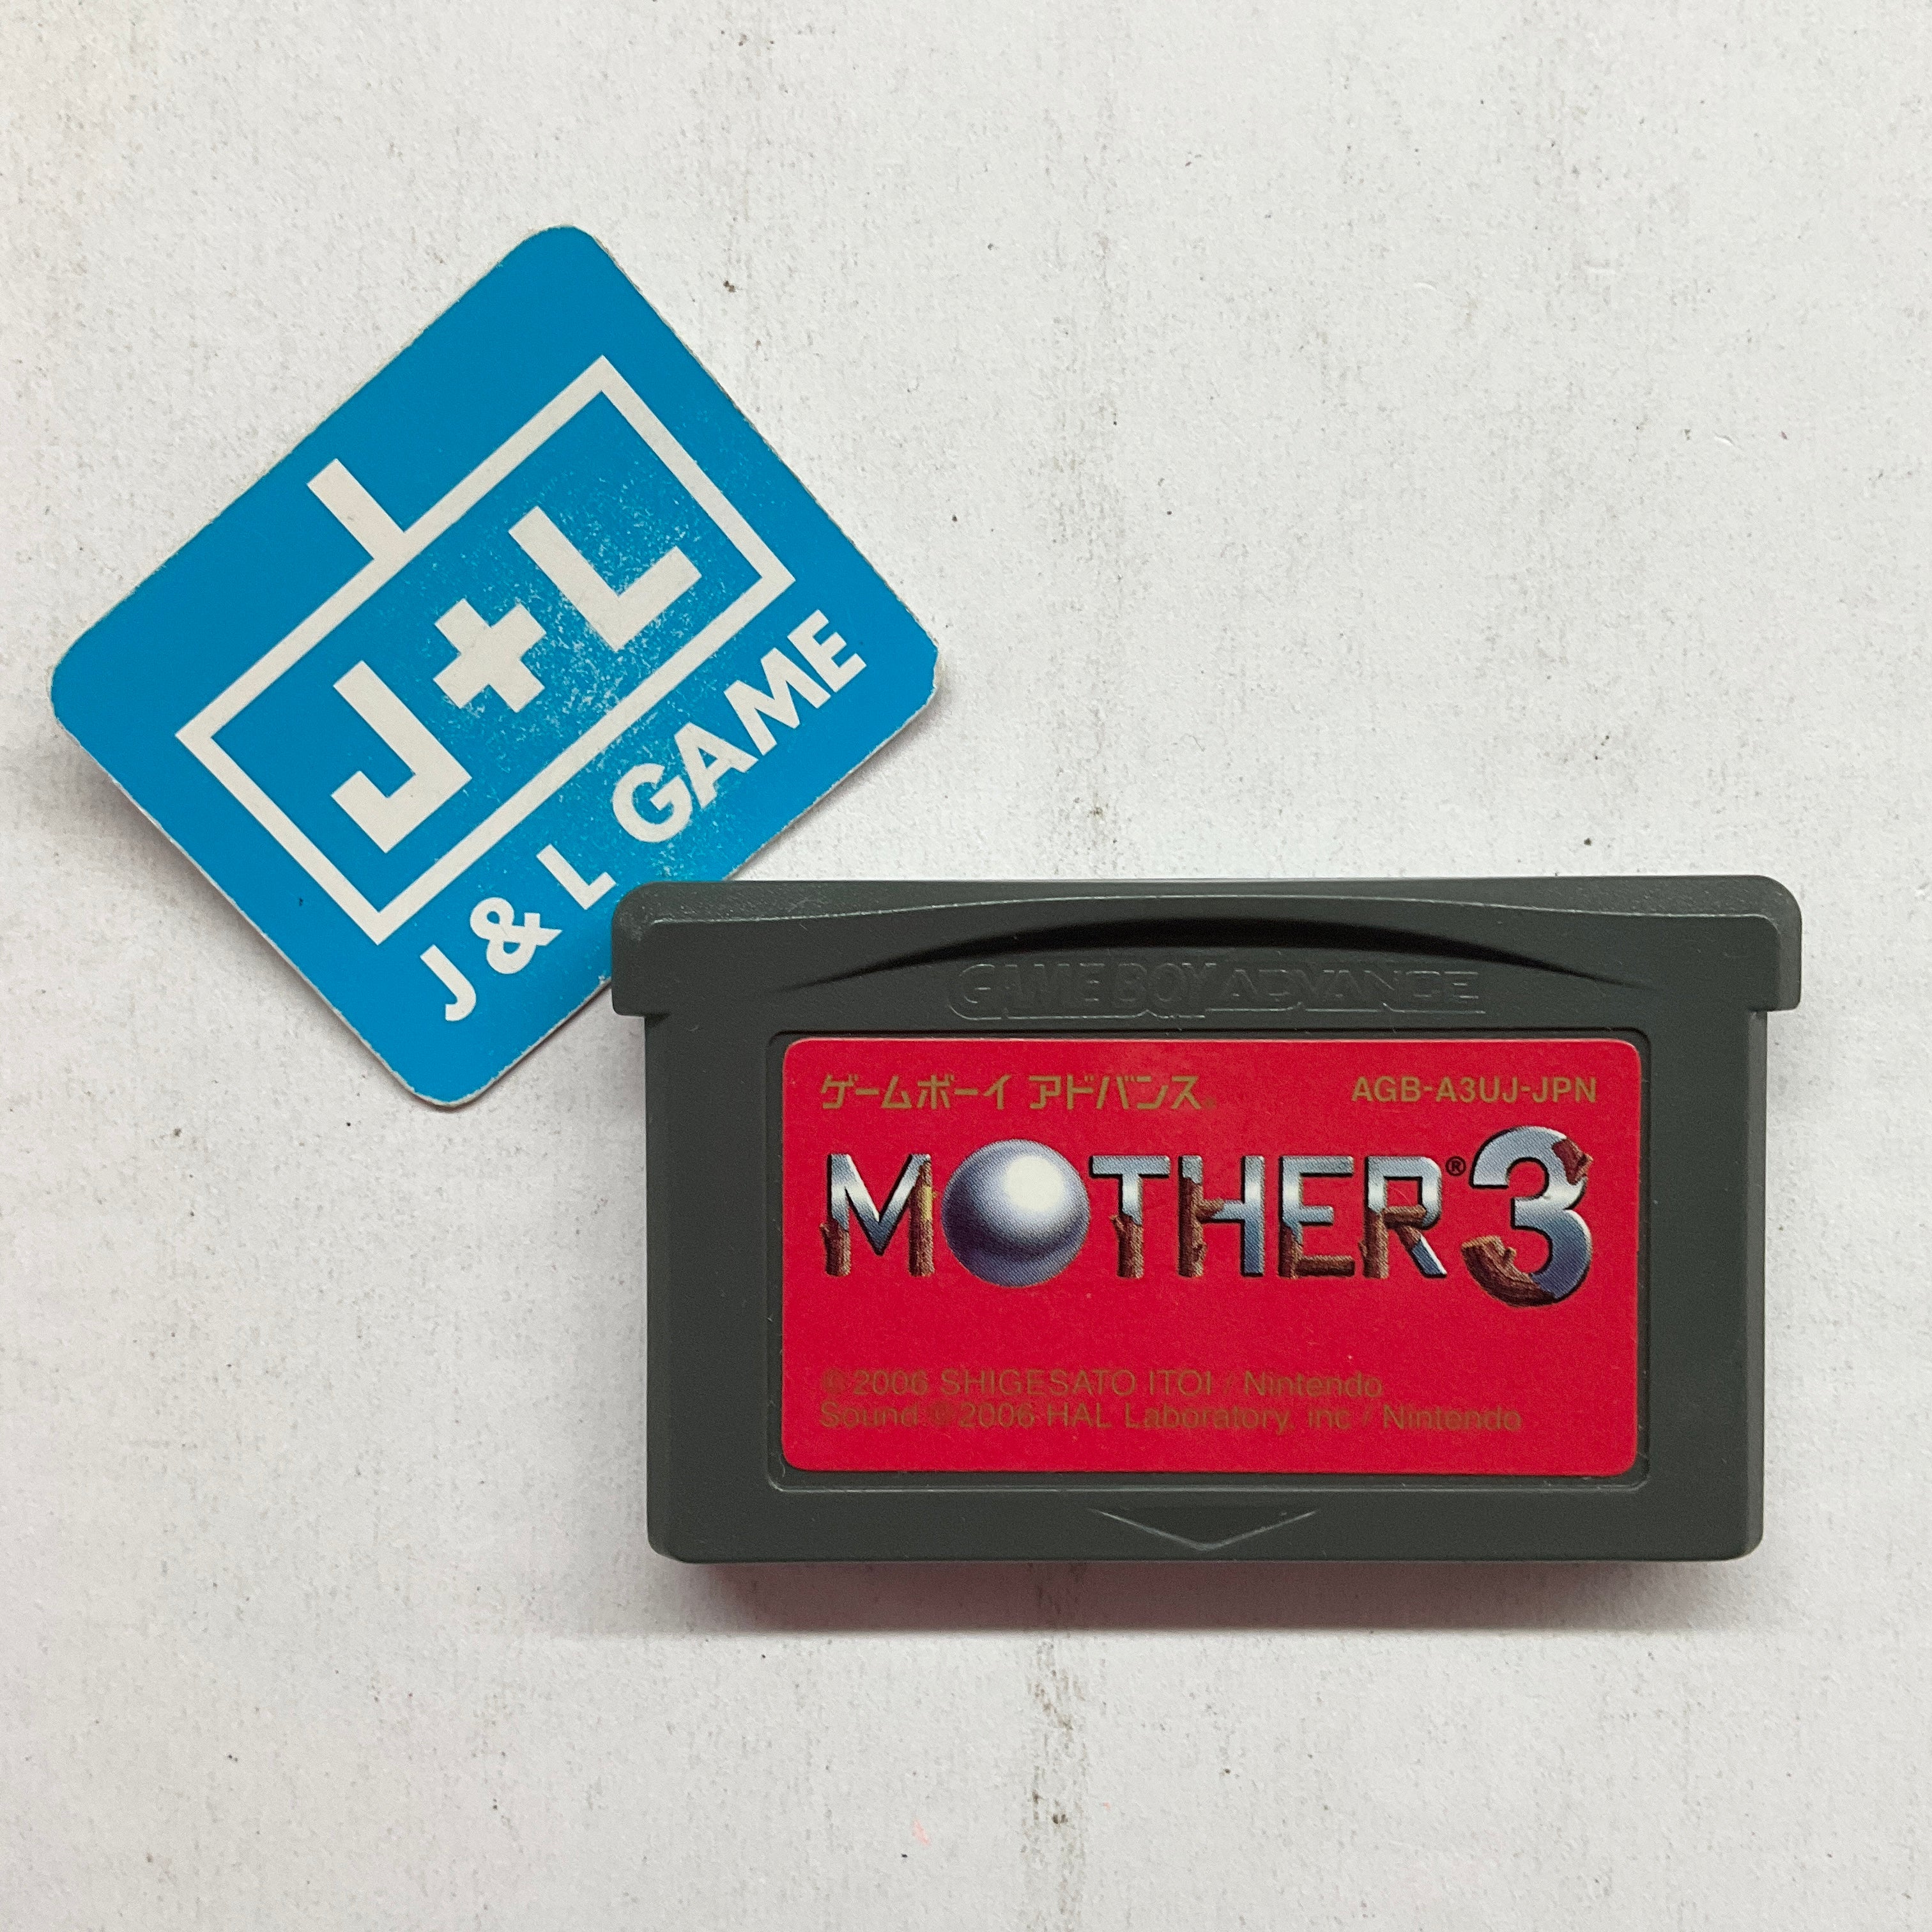 Mother 3 - (GBA) Game Boy Advance [Pre-Owned] (Japanese Import)